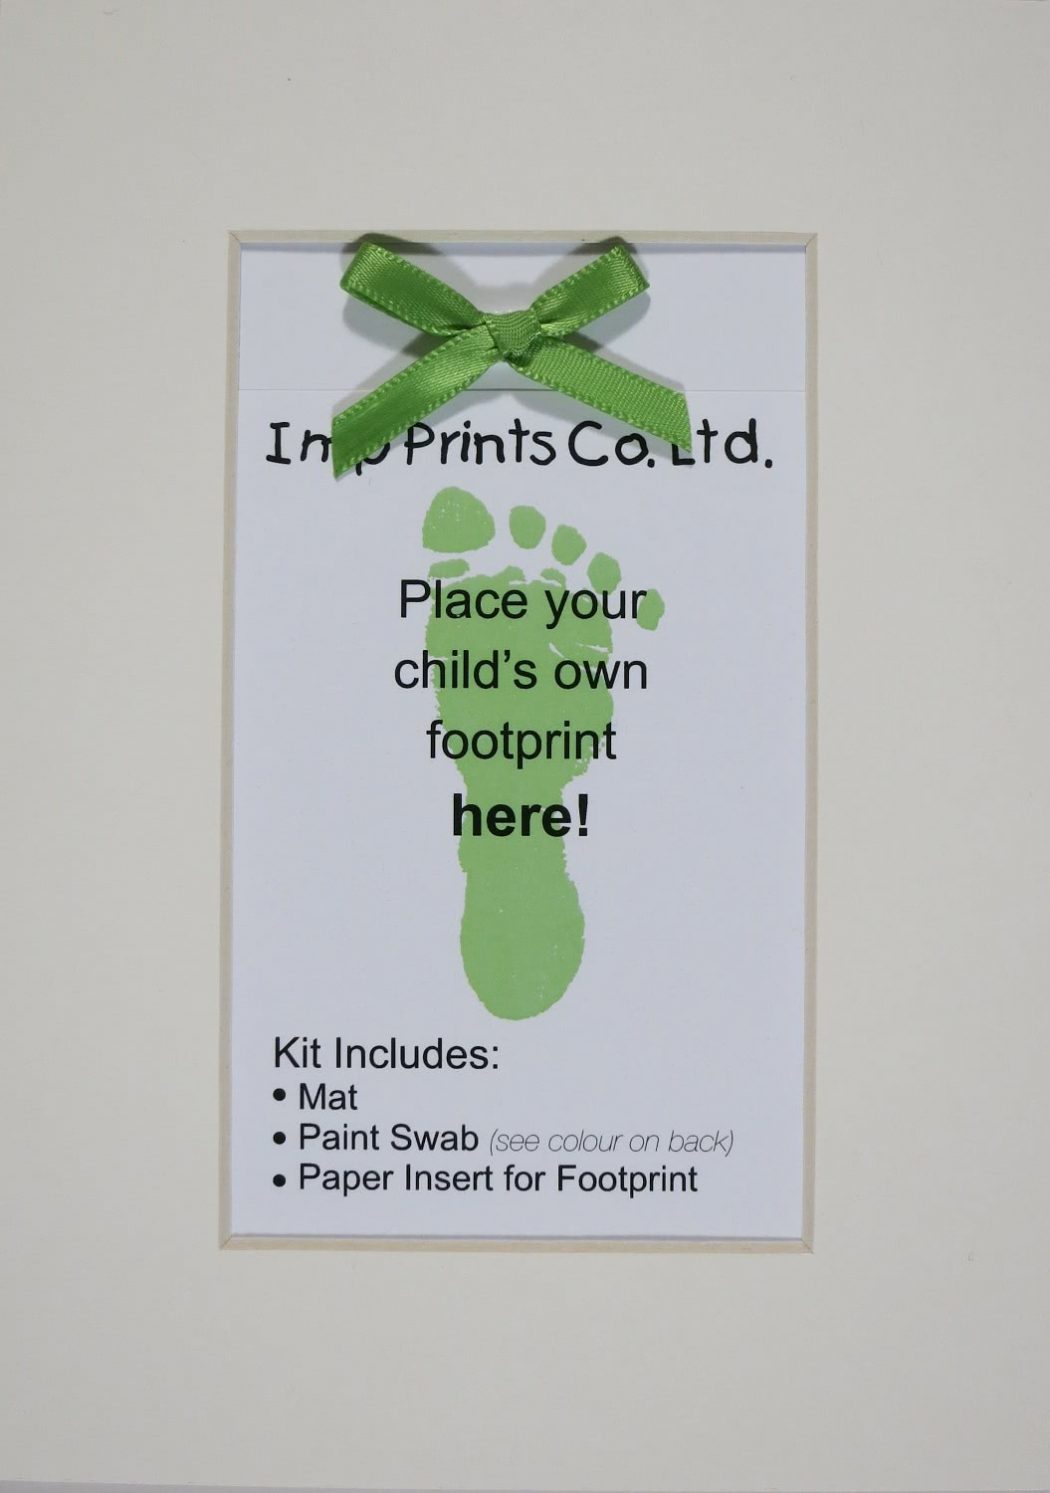 Imp Prints Co keepsakes for parents Plain Ivory Mat with a green bow on the paper near the top. An insert with an image of a greem footprint says "Place your child's own footprint here, kit includes Mat, Paint Swab, Paper